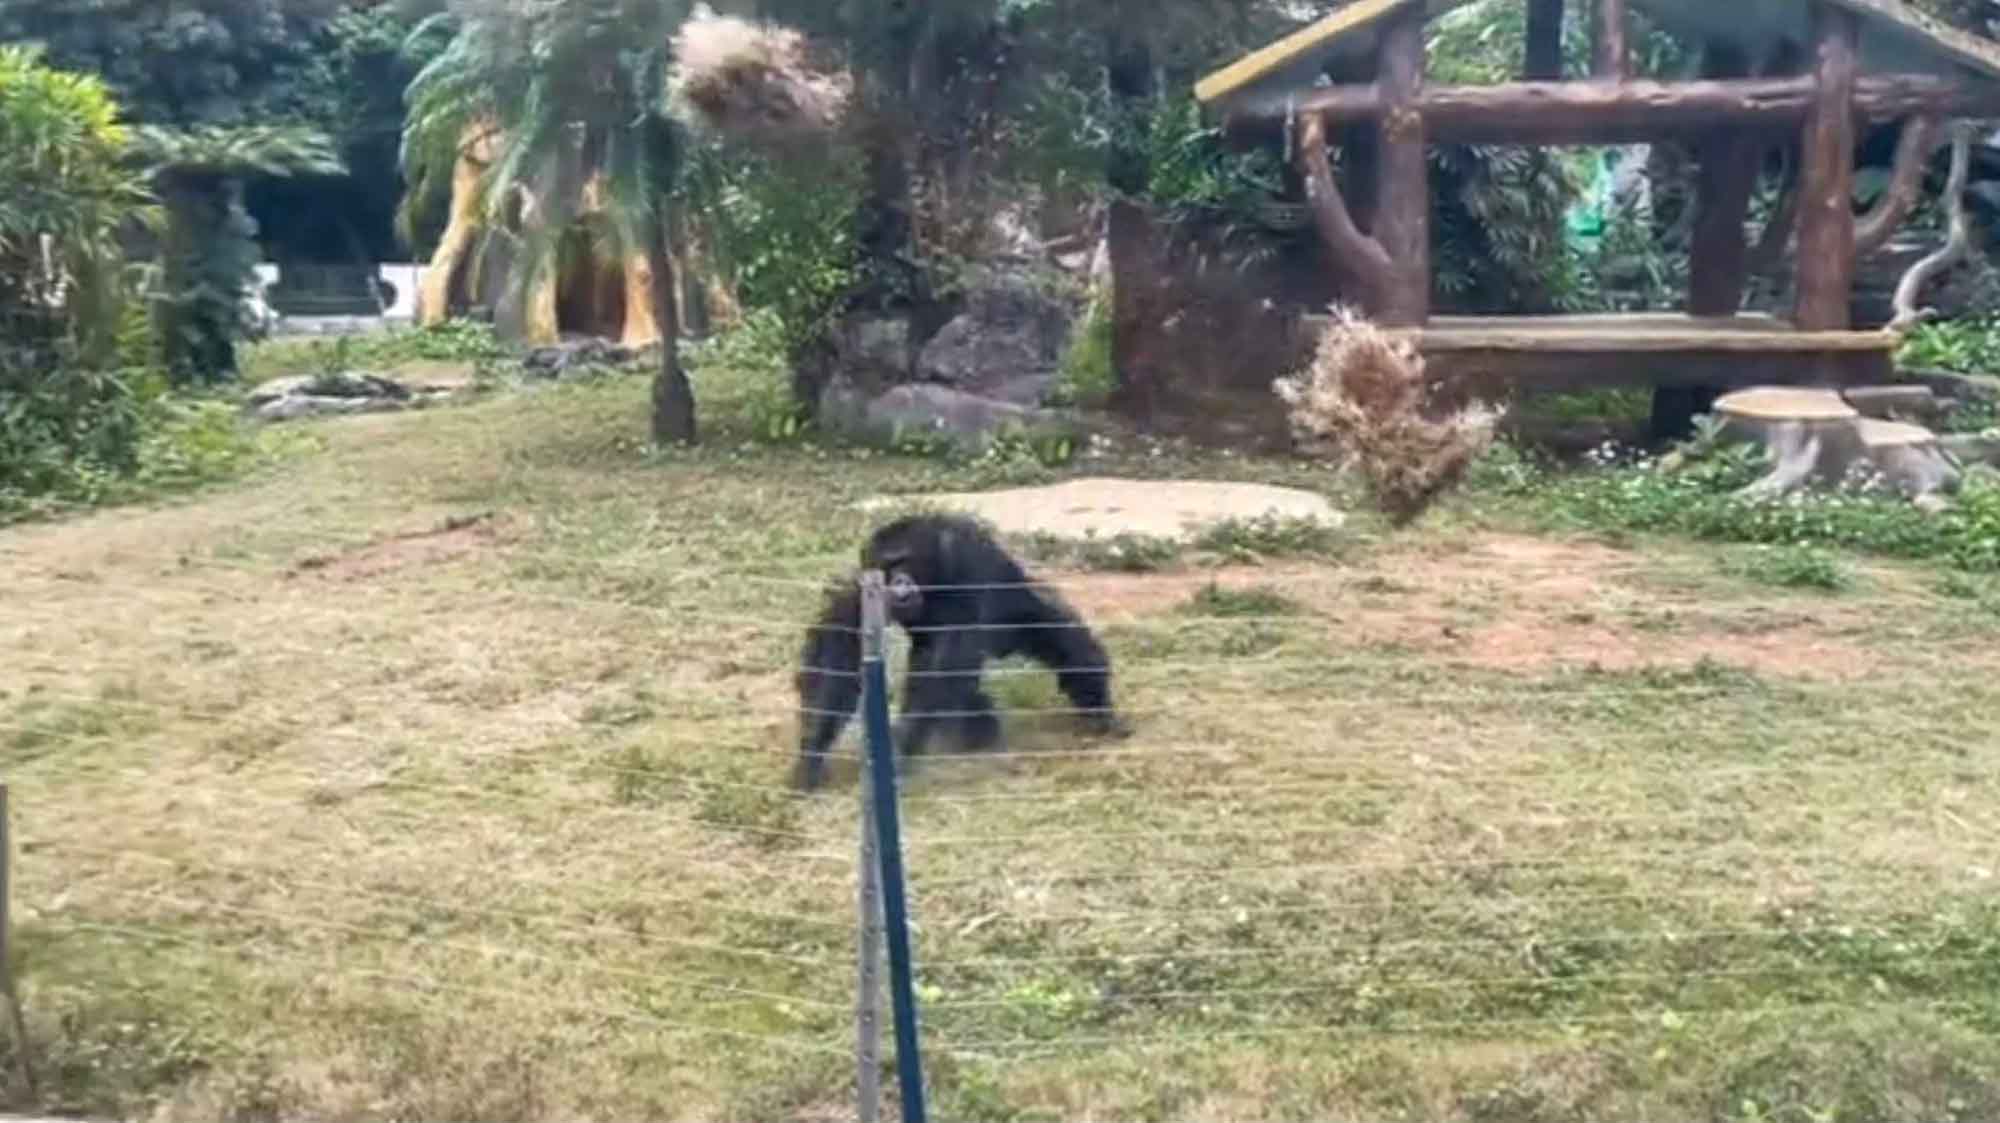 Ape Tries To Pelt Zoo Visitor With Mud